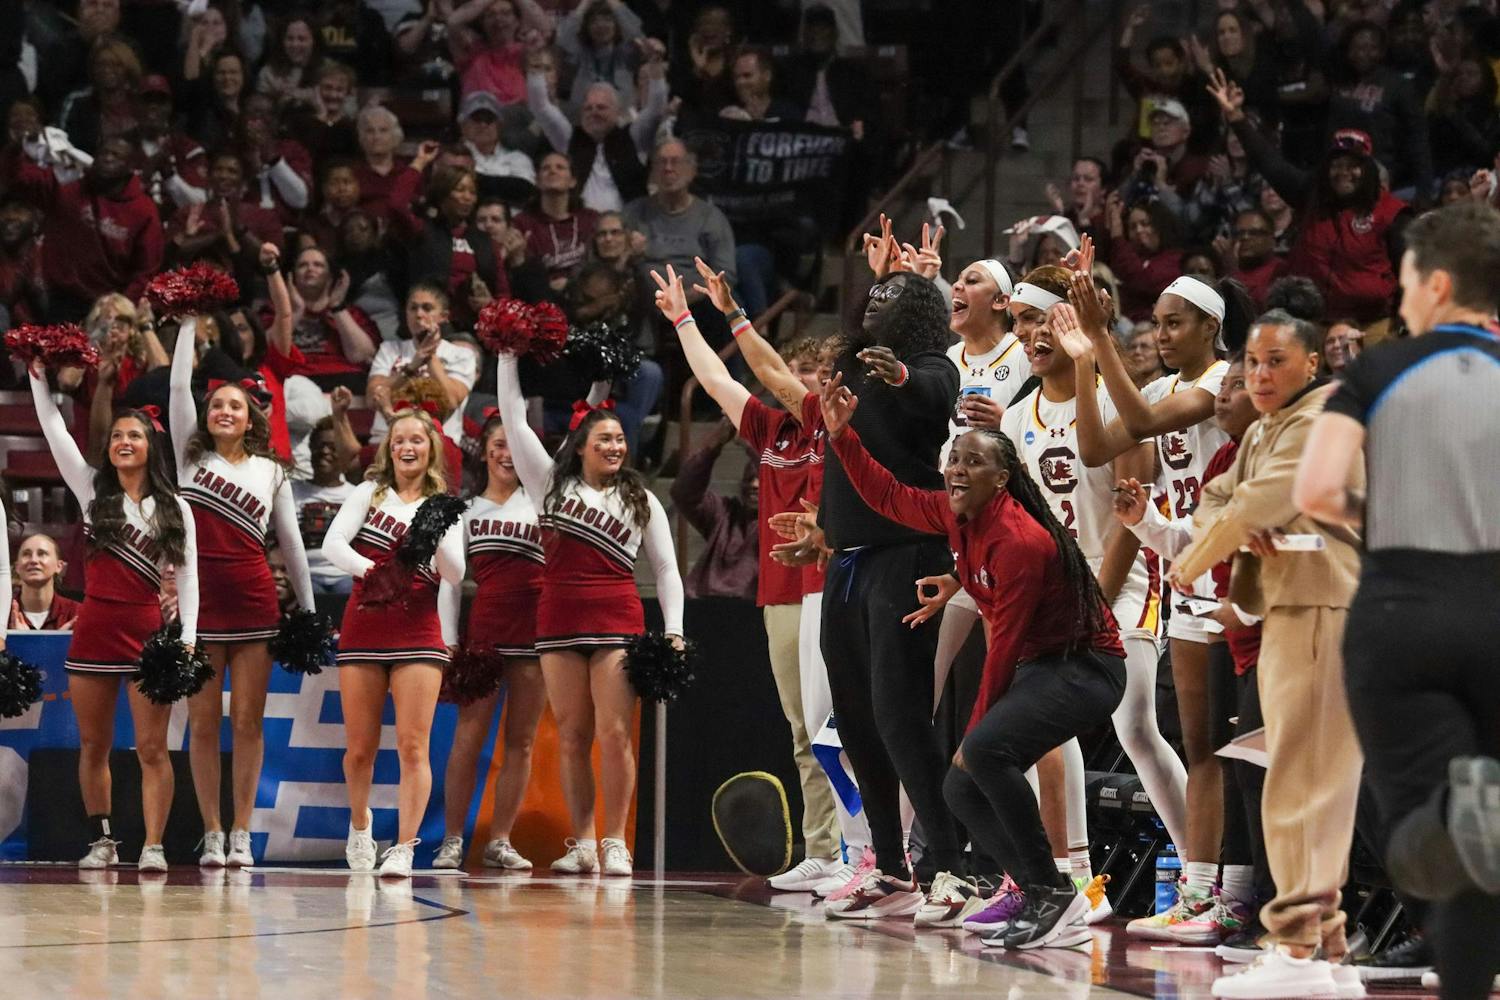 The Gamecock bench celebrates after a 3-point shot is made during South Carolina's game against North Carolina in round two of the NCAA Women's Tournament on March 24, 2024. The Gamecocks put up nine 3-pointers in its 88-41 victory over the Tar Heels.